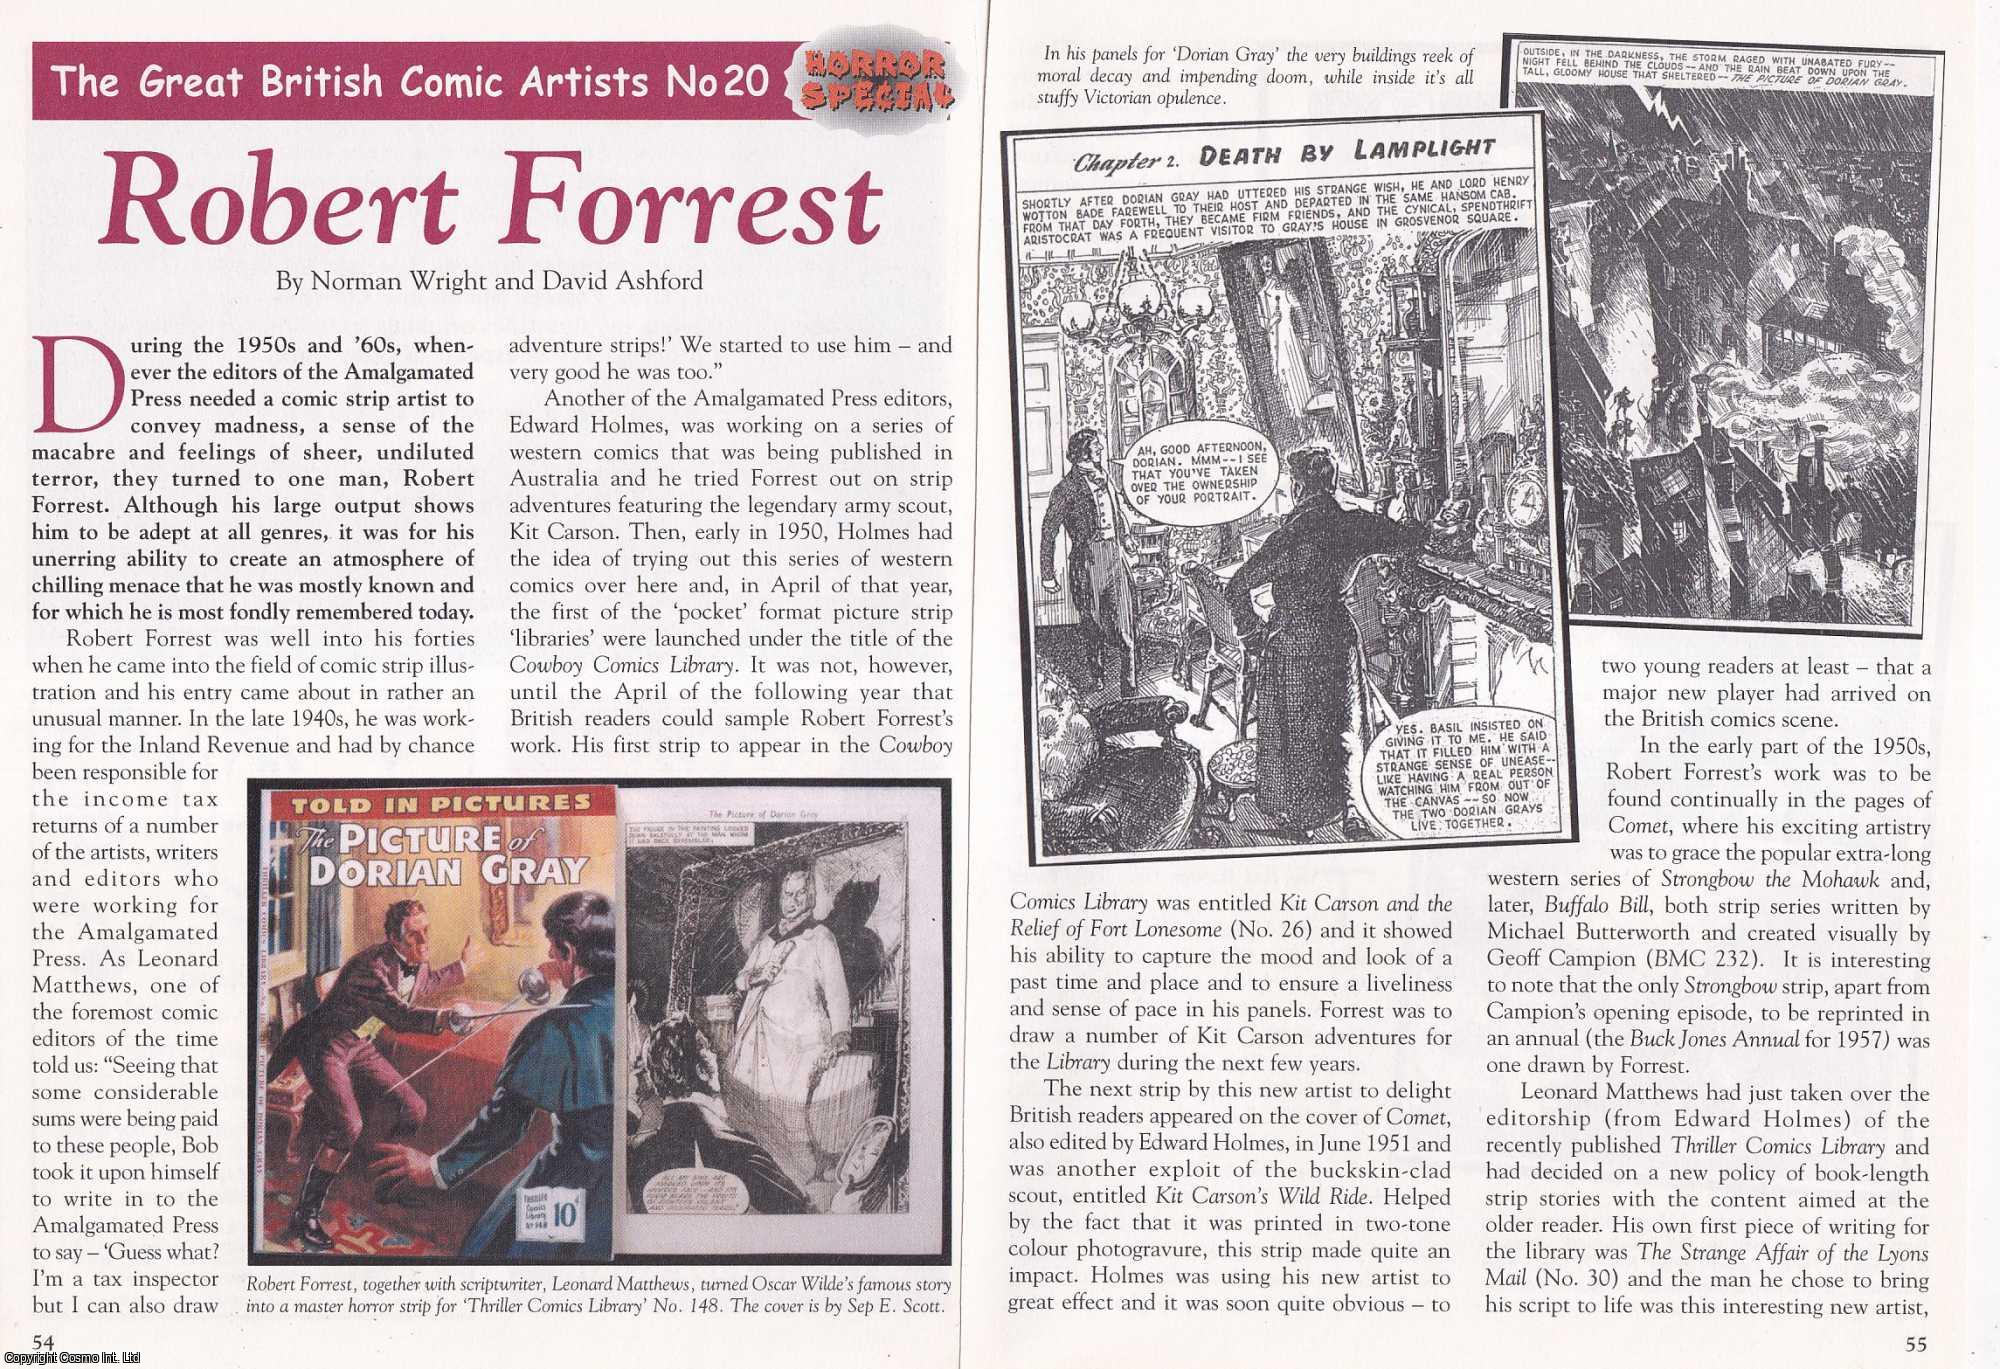 Norman Wright & David Ashford - Robert Forrest : The Great British Comic Artist. This is an original article separated from an issue of The Book & Magazine Collector publication.